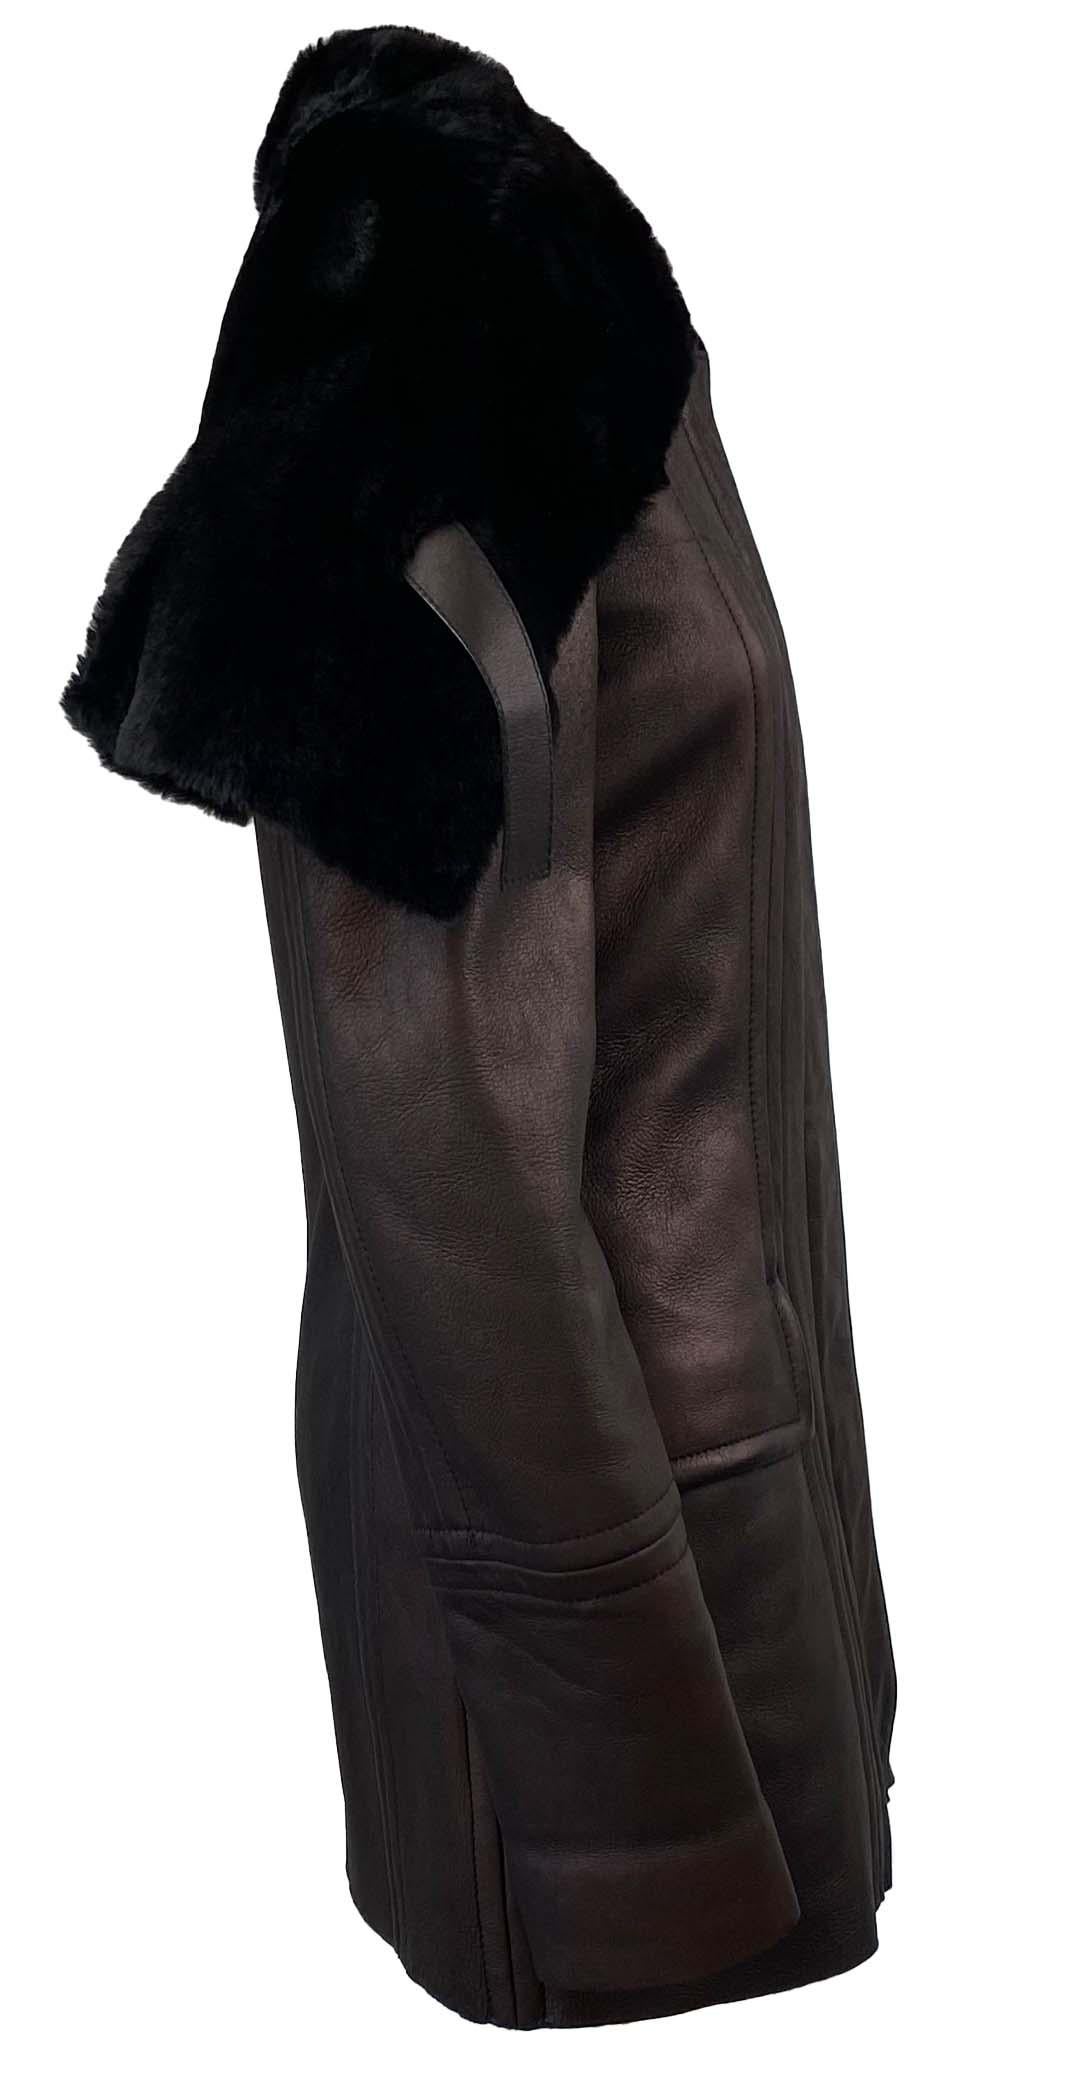 Women's F/W 2003 Gucci by Tom Ford Shearling Leather Metallic Oversized Collar